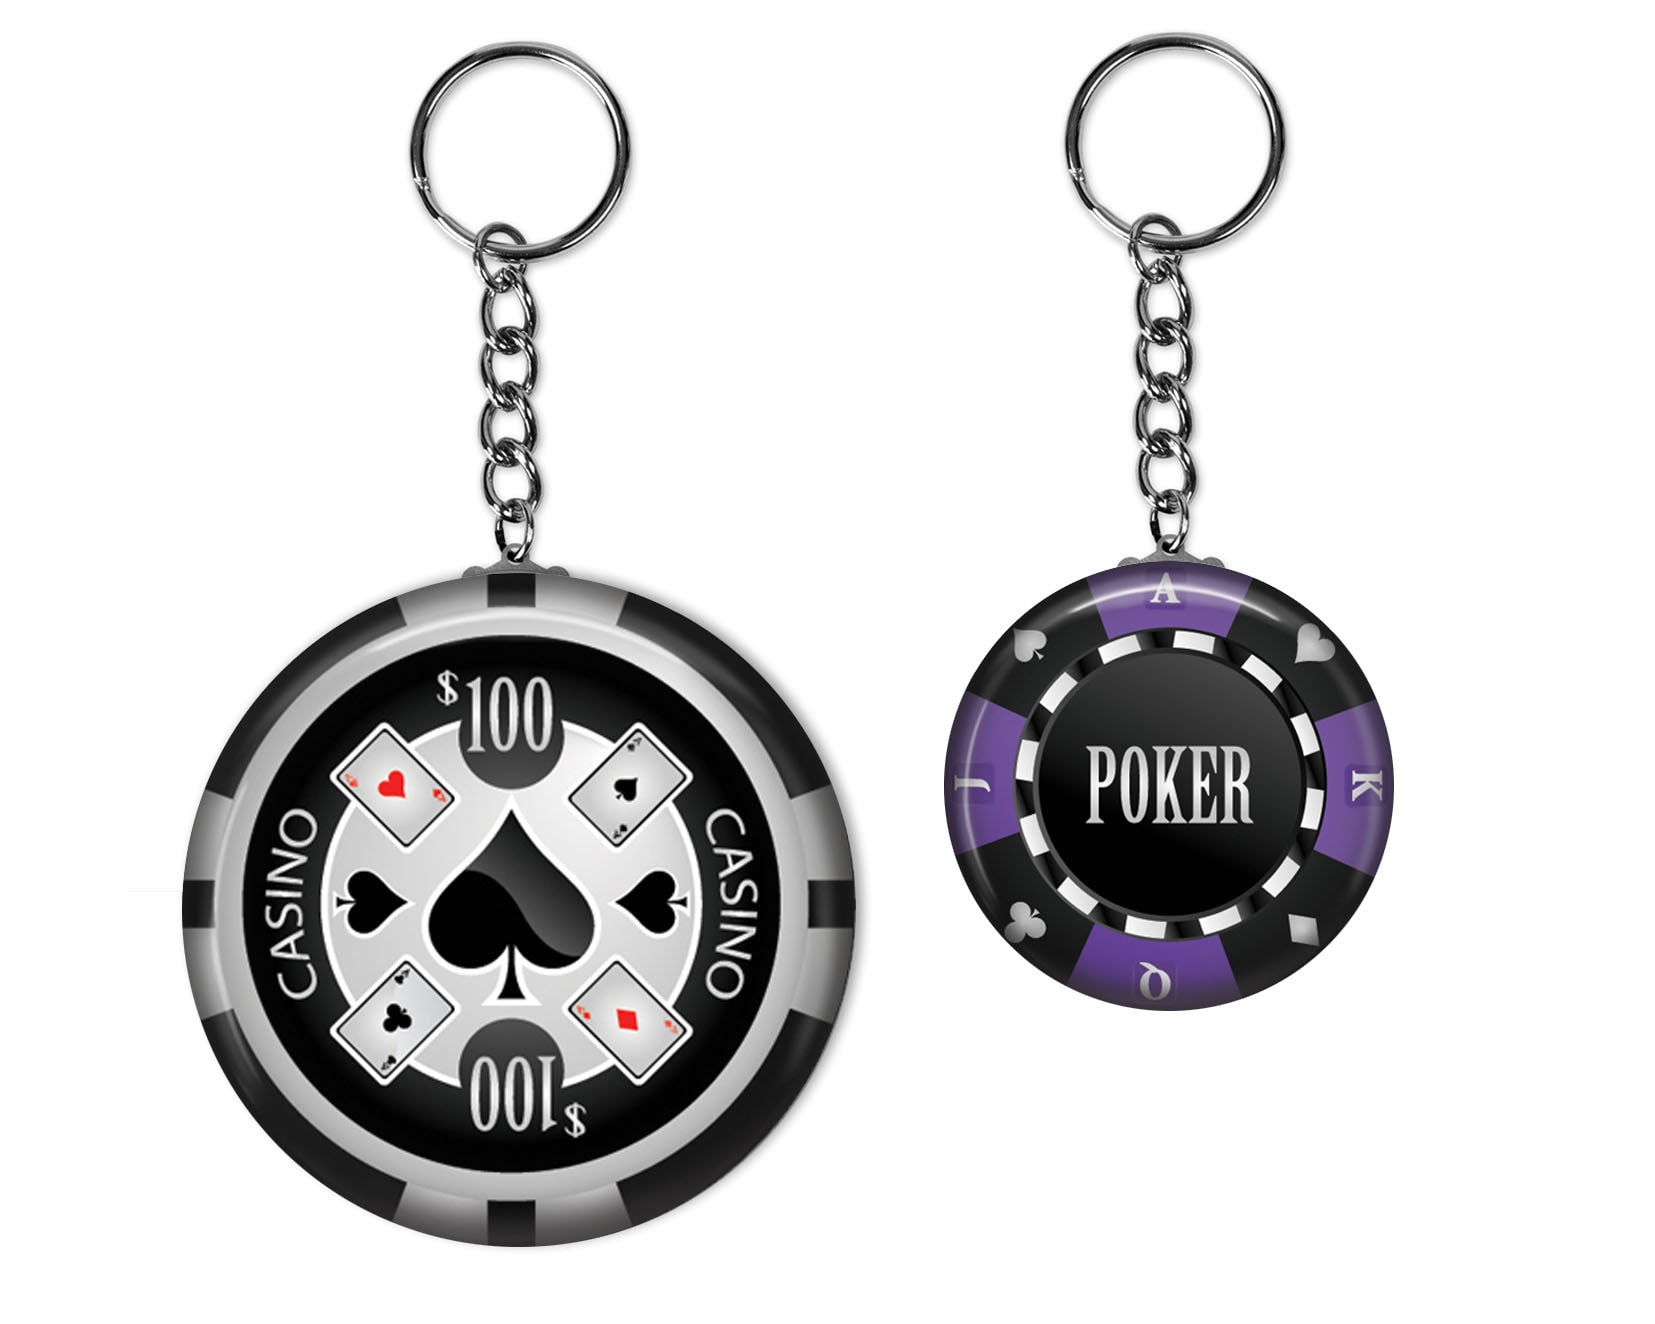 FinesseLaserDesigns Qty 25 Personalized Married or Welcome to Las Vegas Wedding Acrylic Key Chain Favors Poker Chip